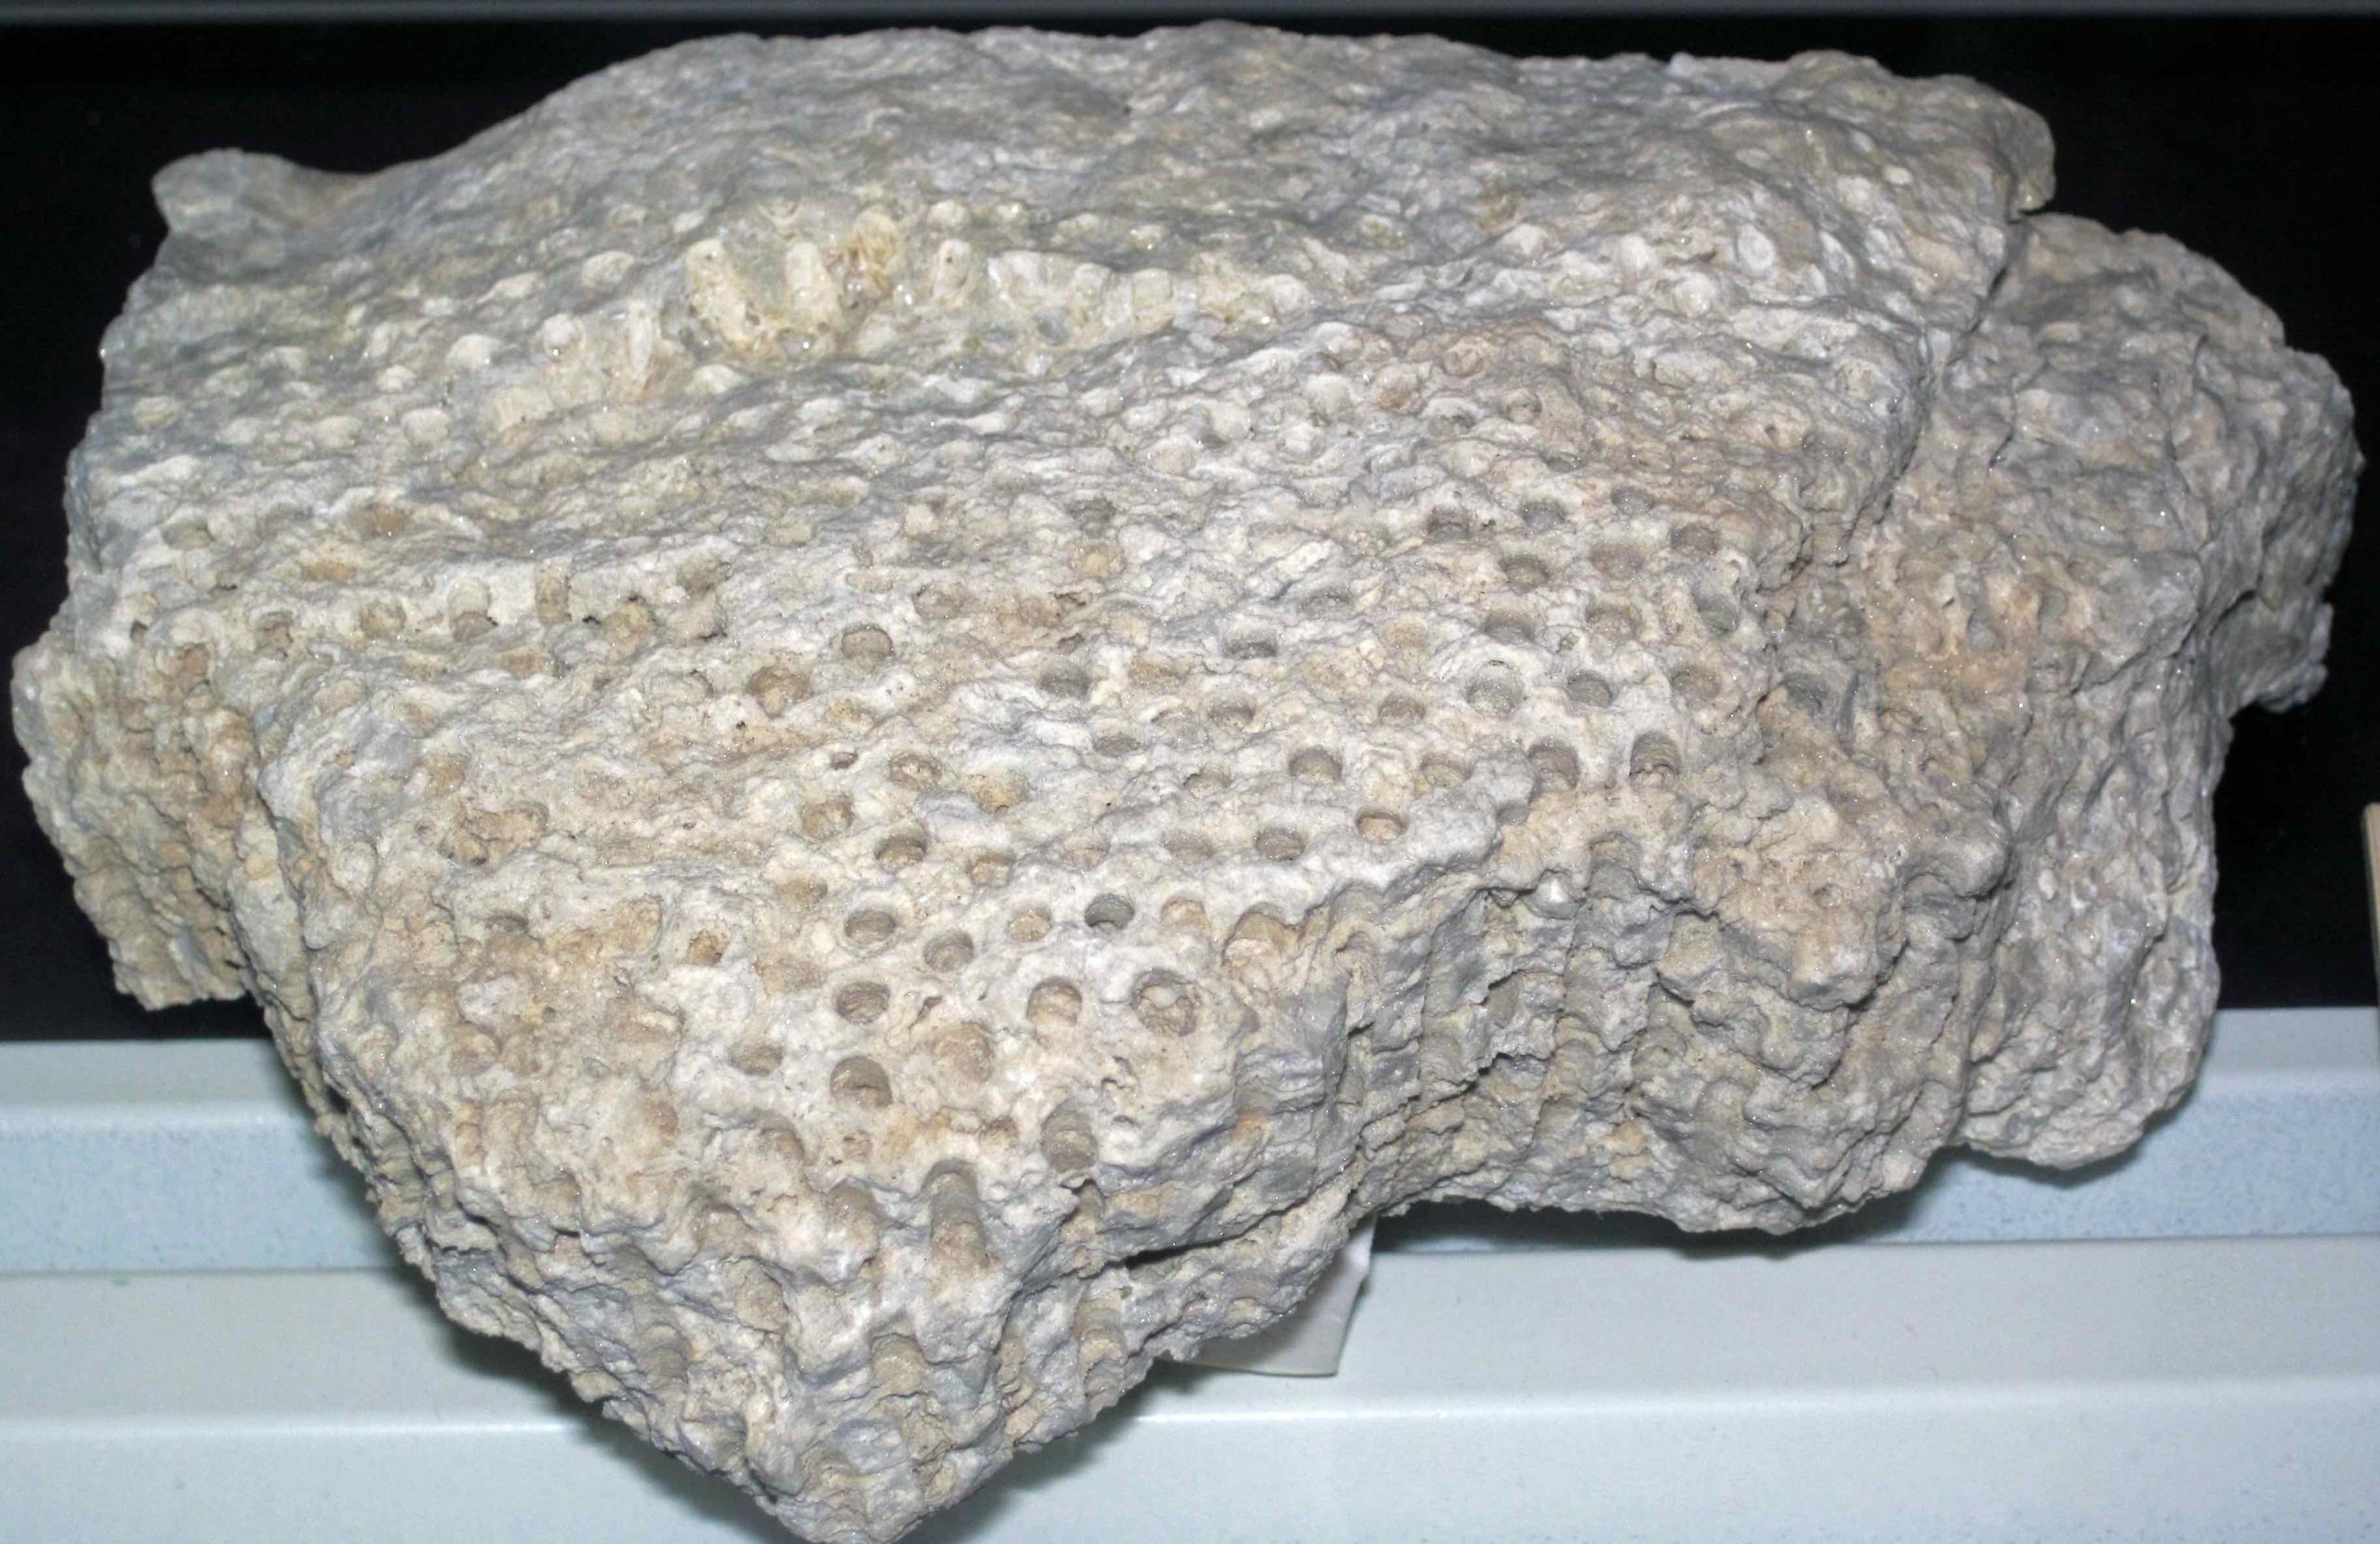 Recrystallized, Silurian-age coral from Ohio